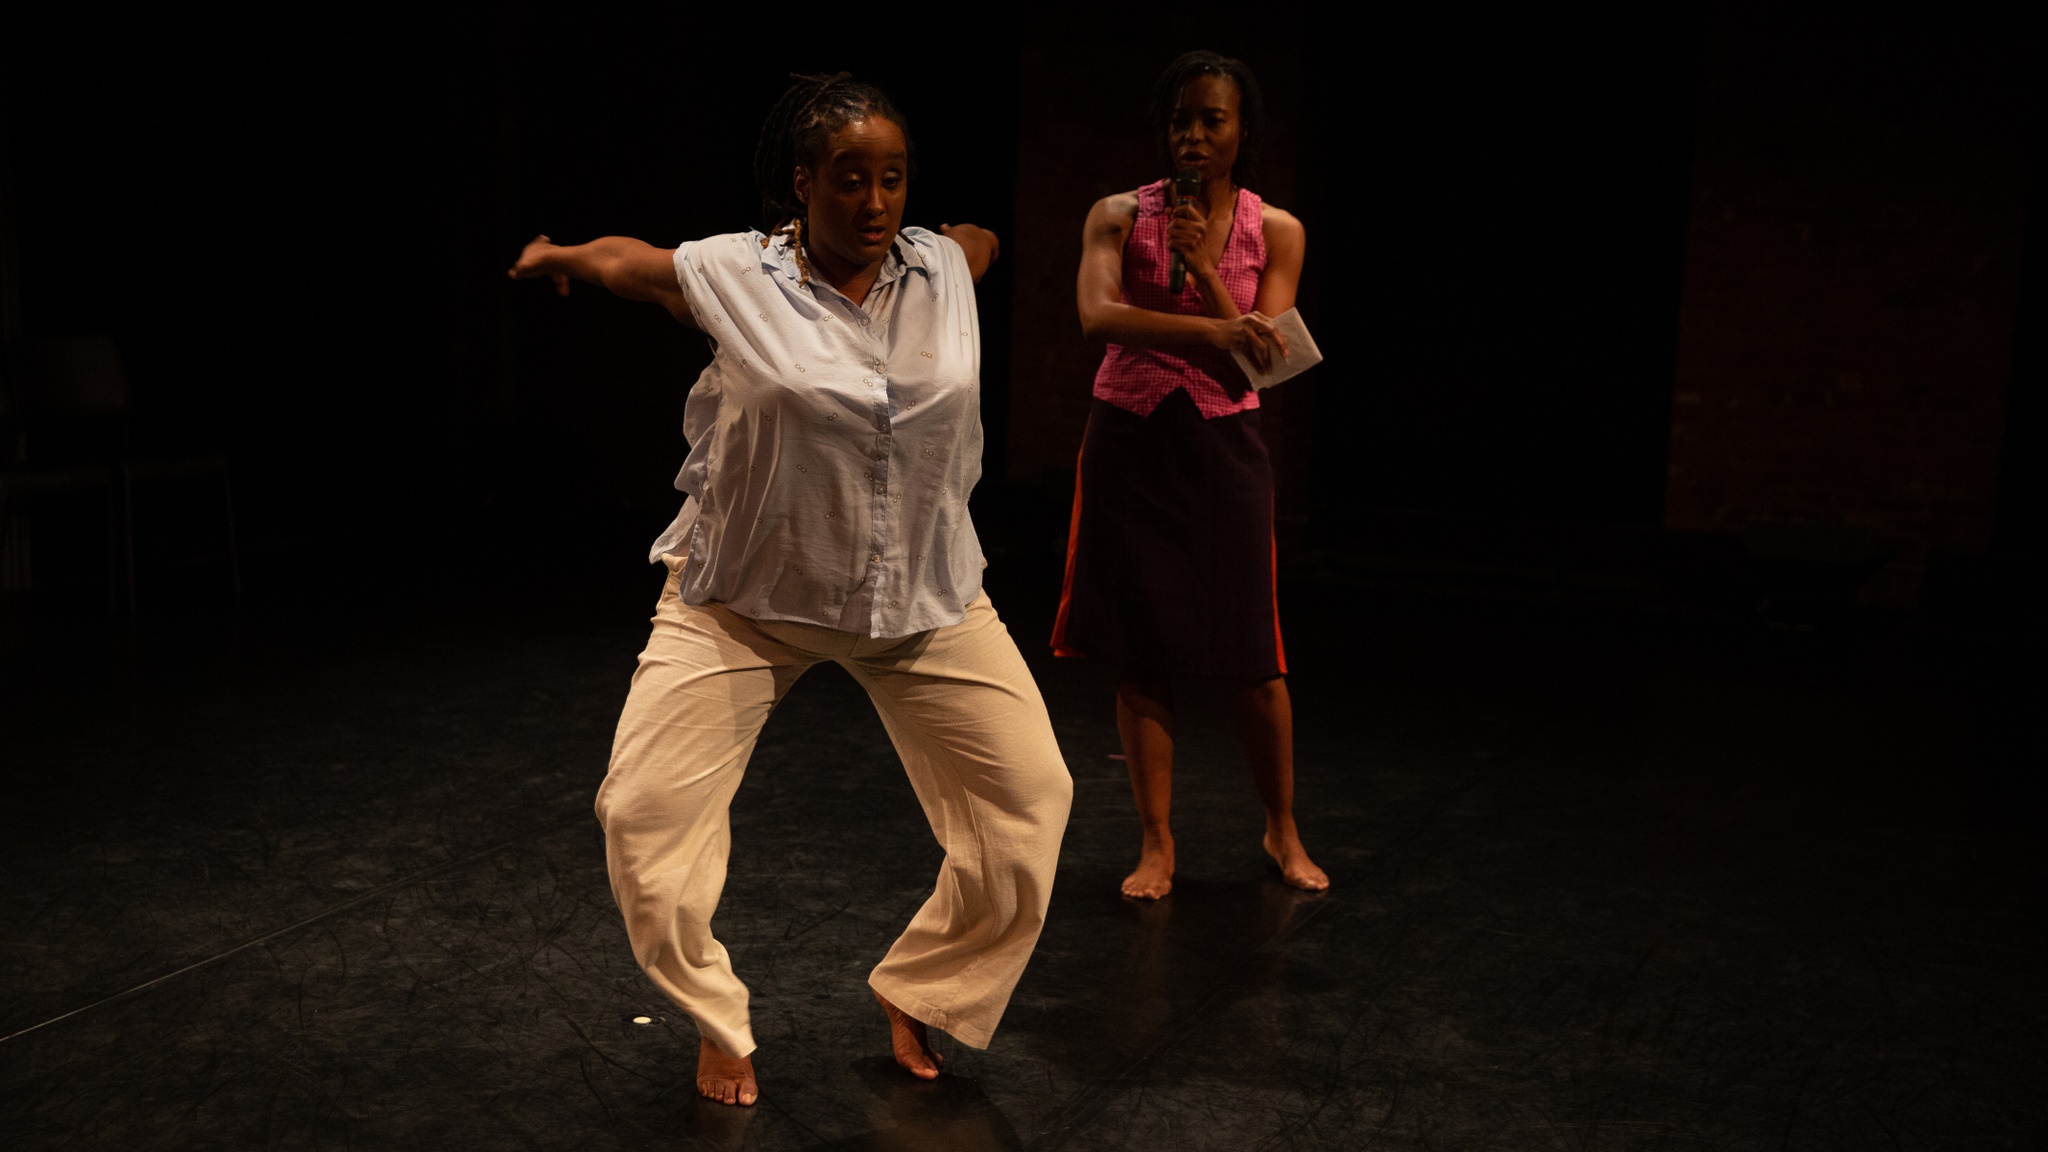 A photo of Kayla Hamilton and Nicole McClam, two dark-skinned Black women. They are both on a stage. Nicole is diagonally behind Kayla. She is wearing dark red mid-length shorts & a pink tank top. She is observing Kayla dancing. Kayla is facing front and has her knees bent as her arms are energetically swung behind her. Kayla is wearing beige pants with a white sleeveless blouse.